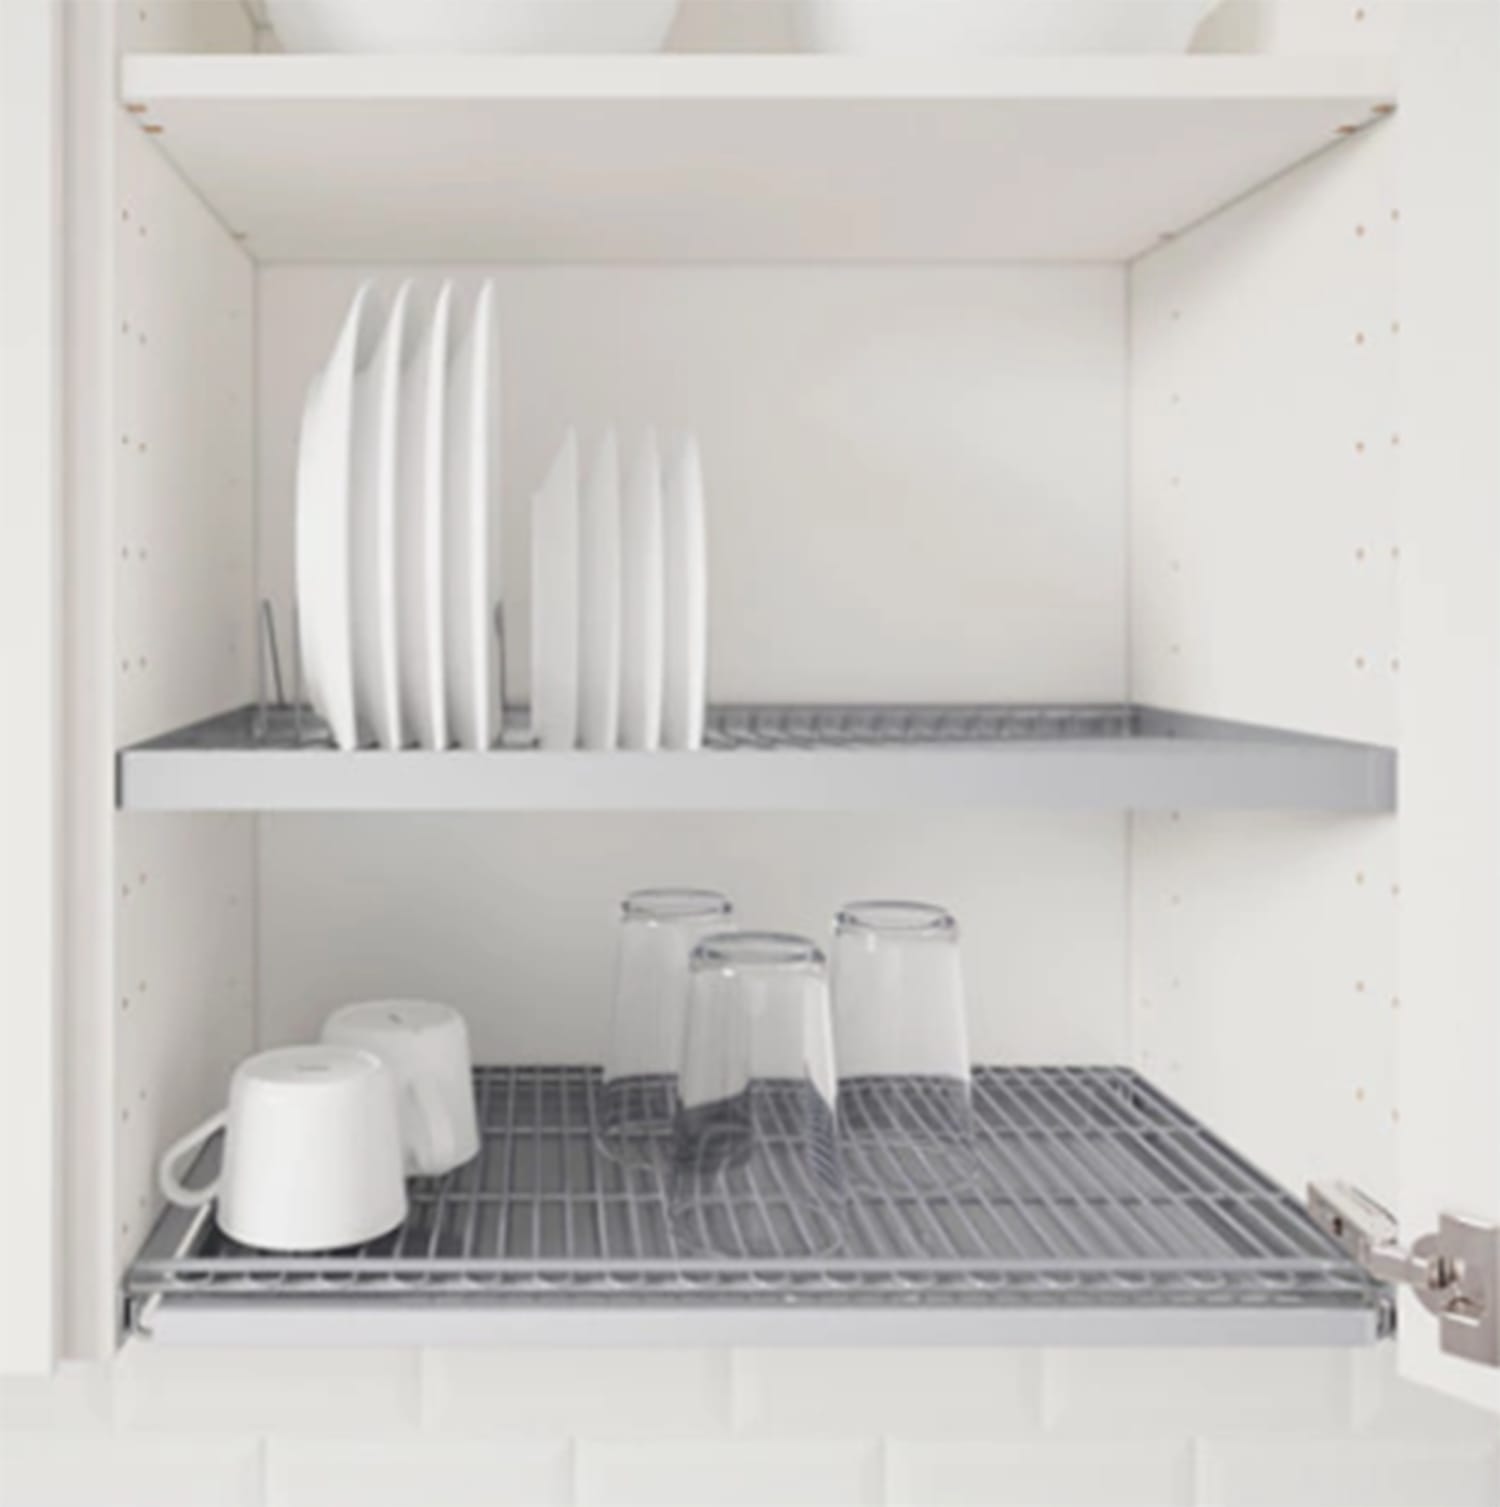 Finnish Dish Drying Closets: What They Are and Where to Buy One